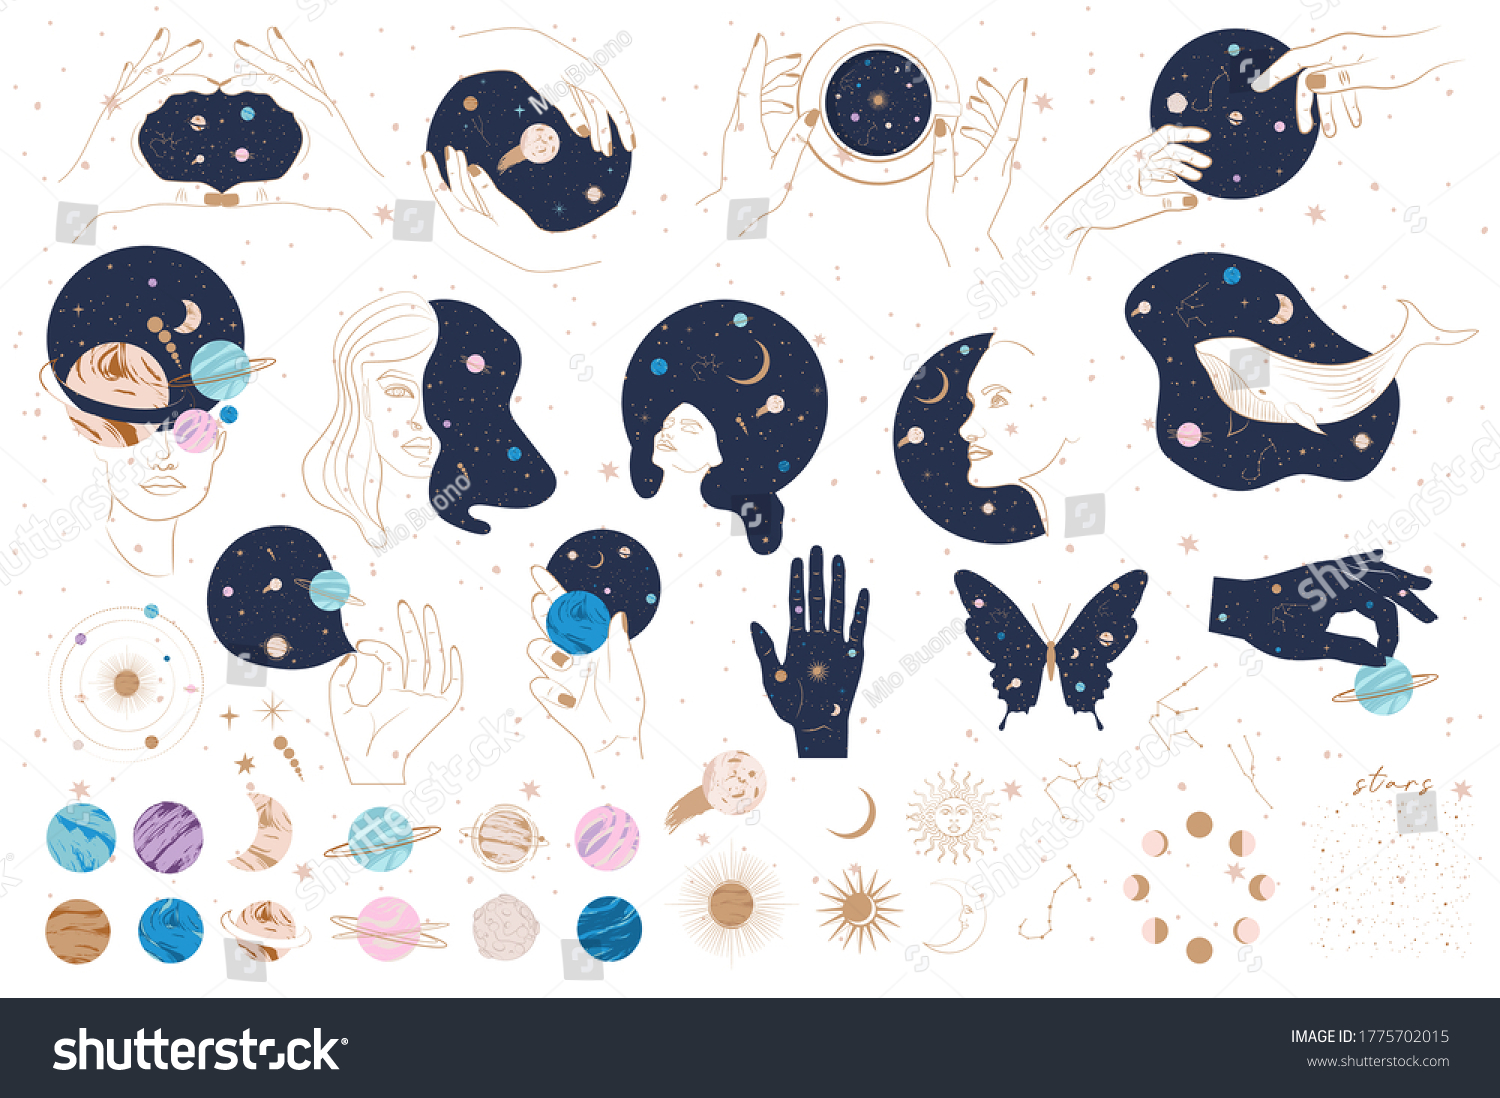 Collection of Mystical and Astrology objects, Woman face, Space objects, planet, constellation, human hands. Minimalistic objects made in the one line style. Editable vector illustration. #1775702015